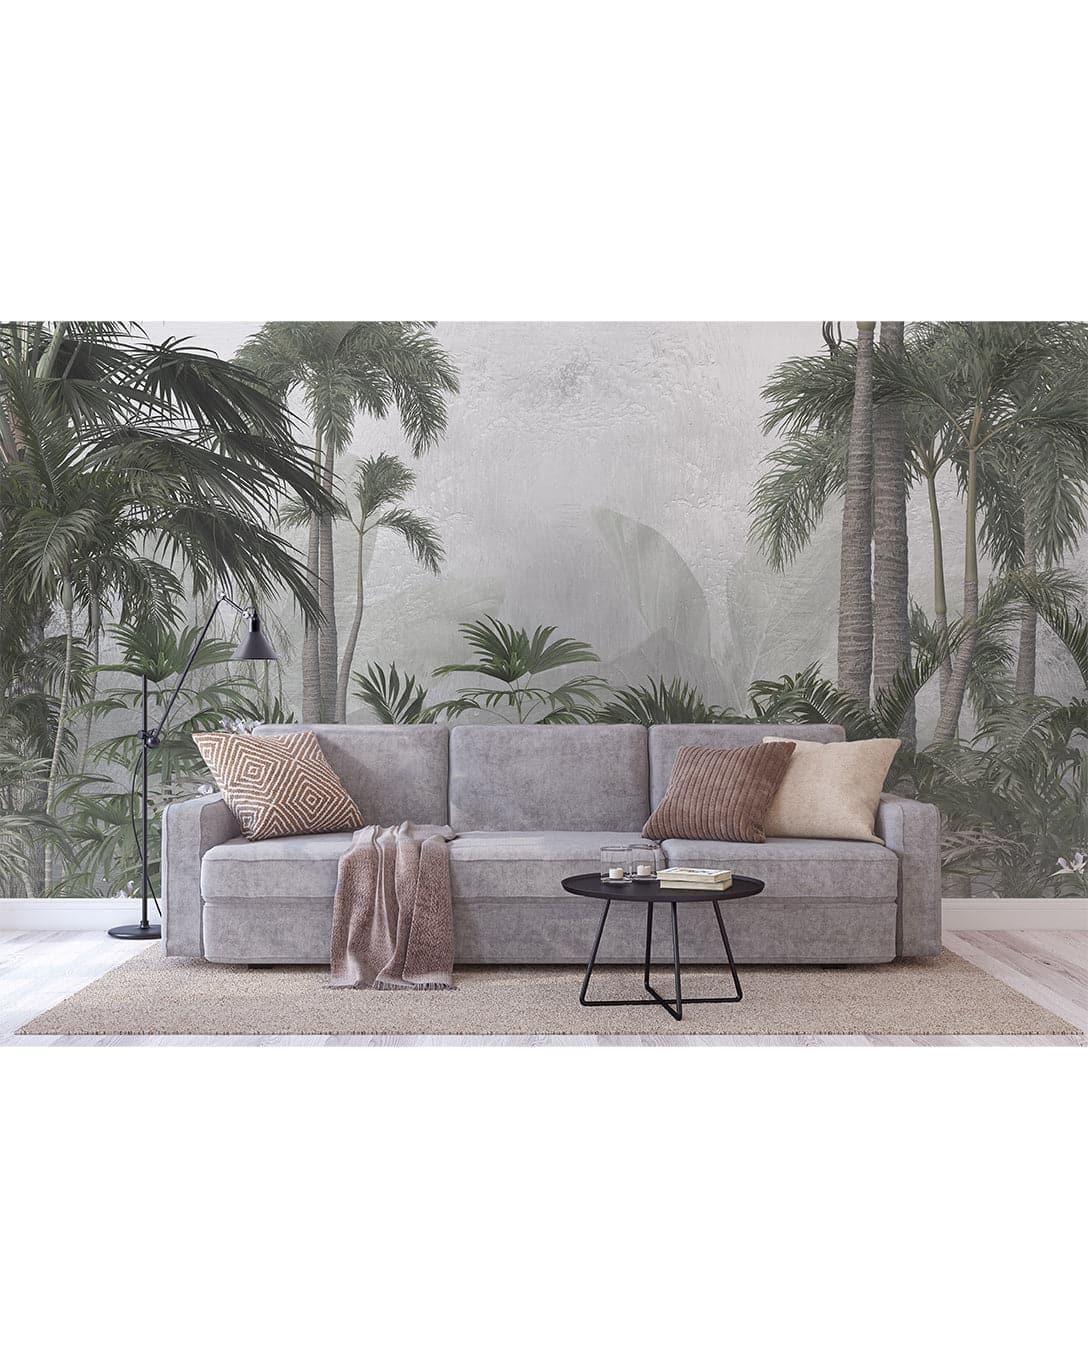 Tropical Exotic Palm Leaves Removable Wallpaper Mystic Jungle Tropical Self Adhesive Wall Mural Mystic Jungle Tropical Self Adhesive Wall Mural 